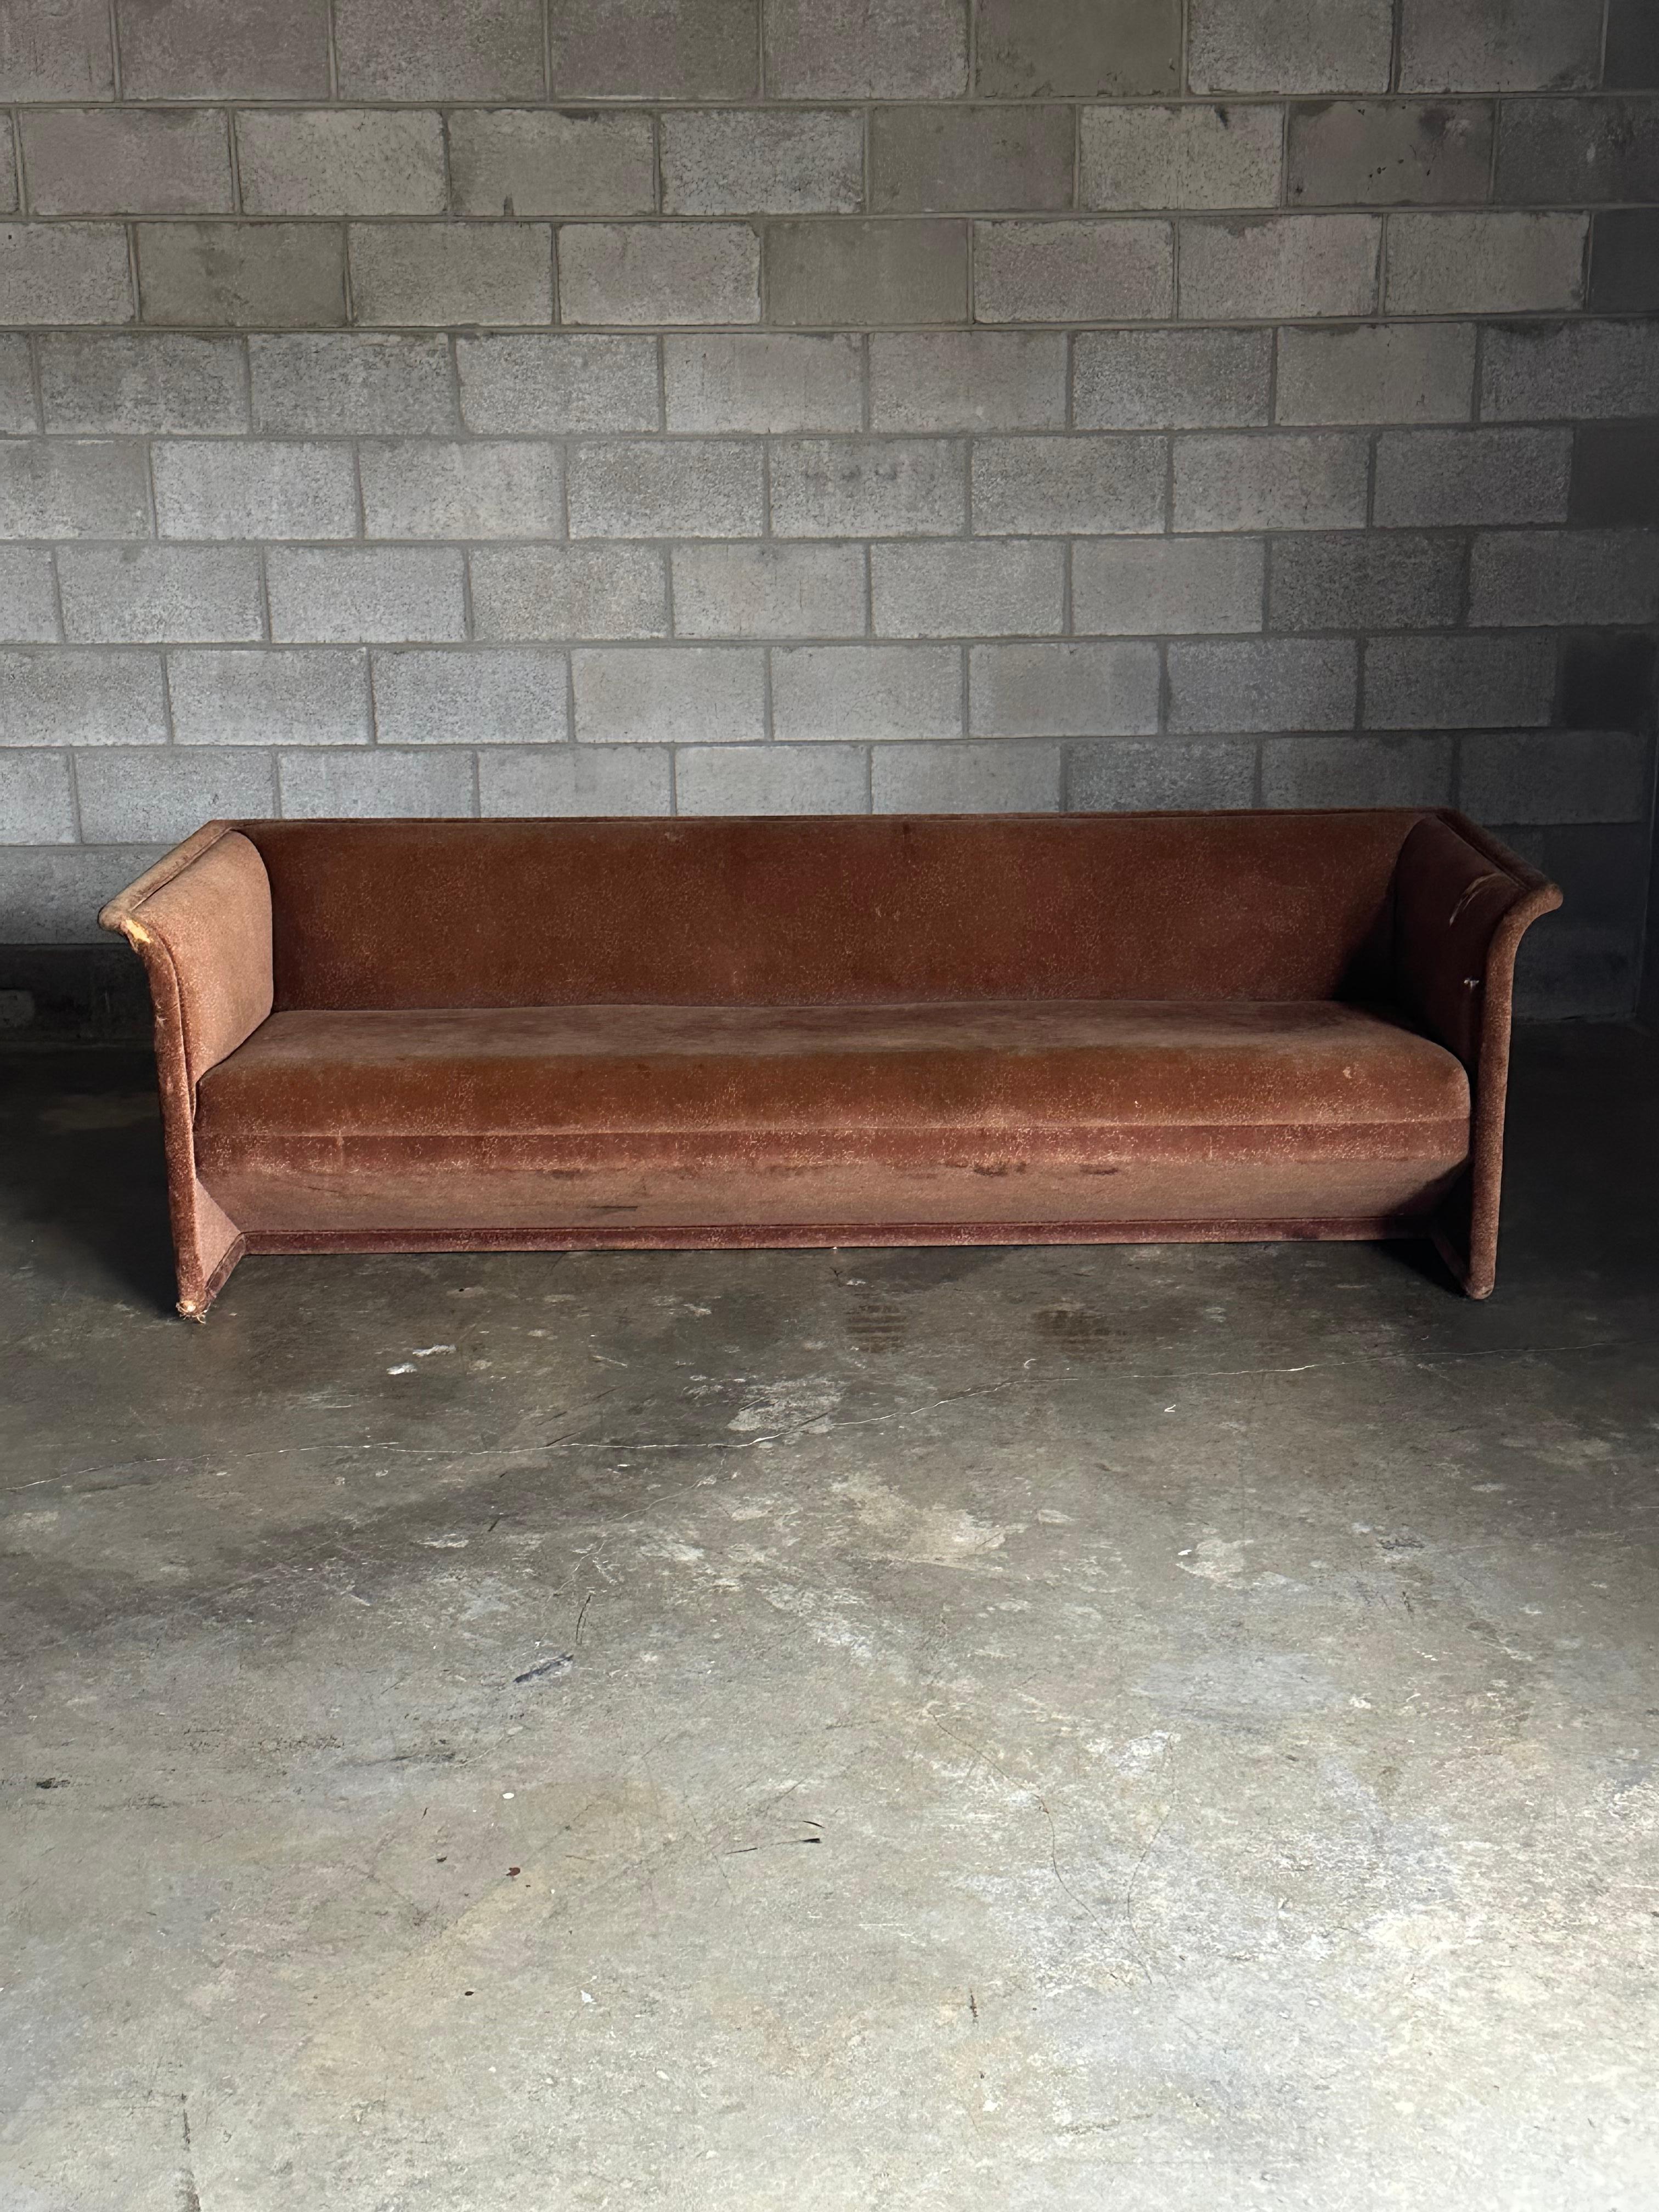 A rare sofa designed by Ward Bennett for Brickel Associates. Great form with slightly bowed out arms and back, it’s equal parts stylish and comfortable, this sofa utilizes a smaller footprint.

Would work well in a variety of interiors alongside